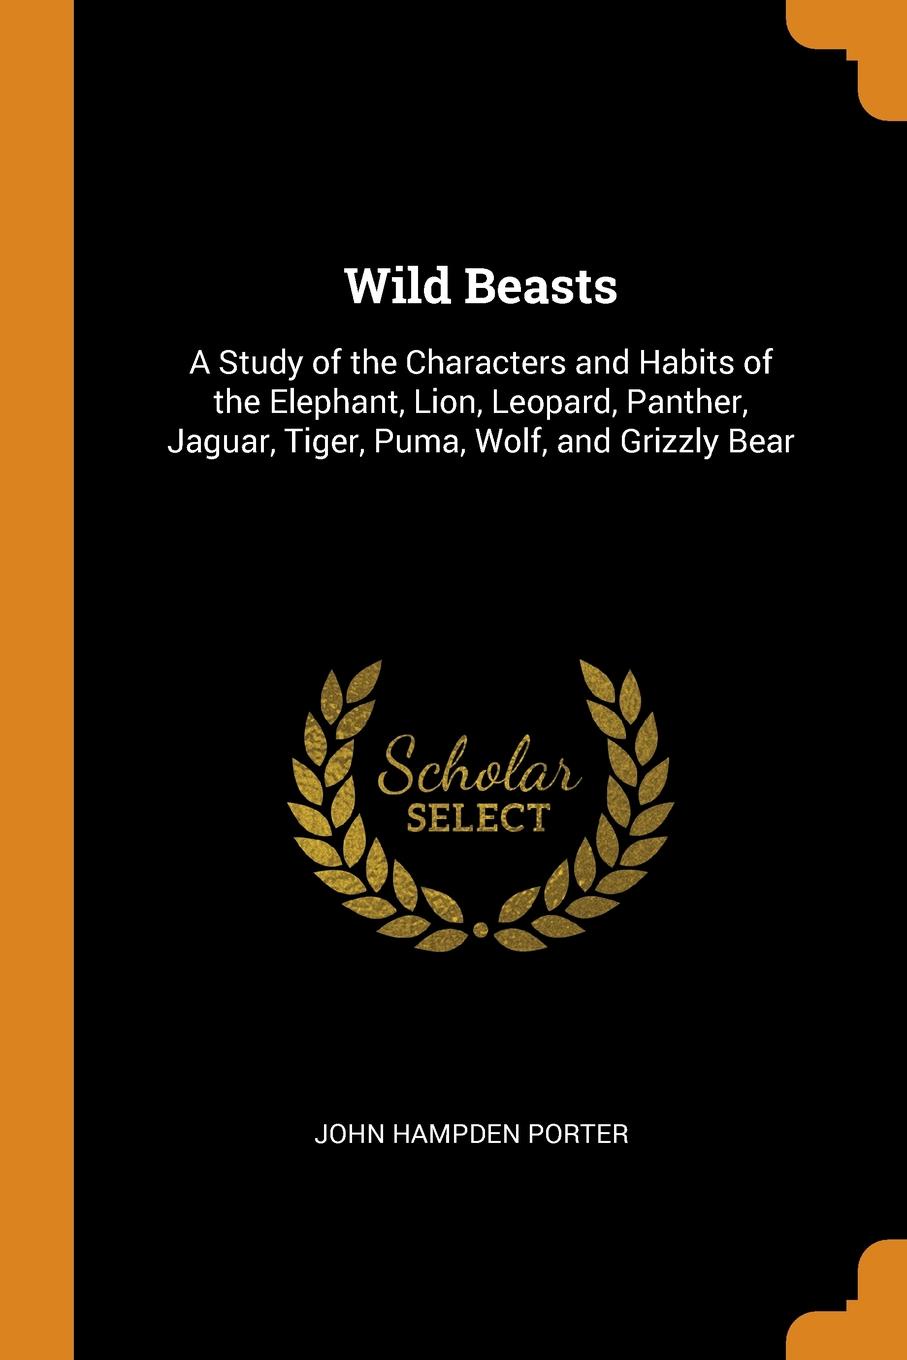 Wild Beasts. A Study of the Characters and Habits of the Elephant, Lion, Leopard, Panther, Jaguar, Tiger, Puma, Wolf, and Grizzly Bear